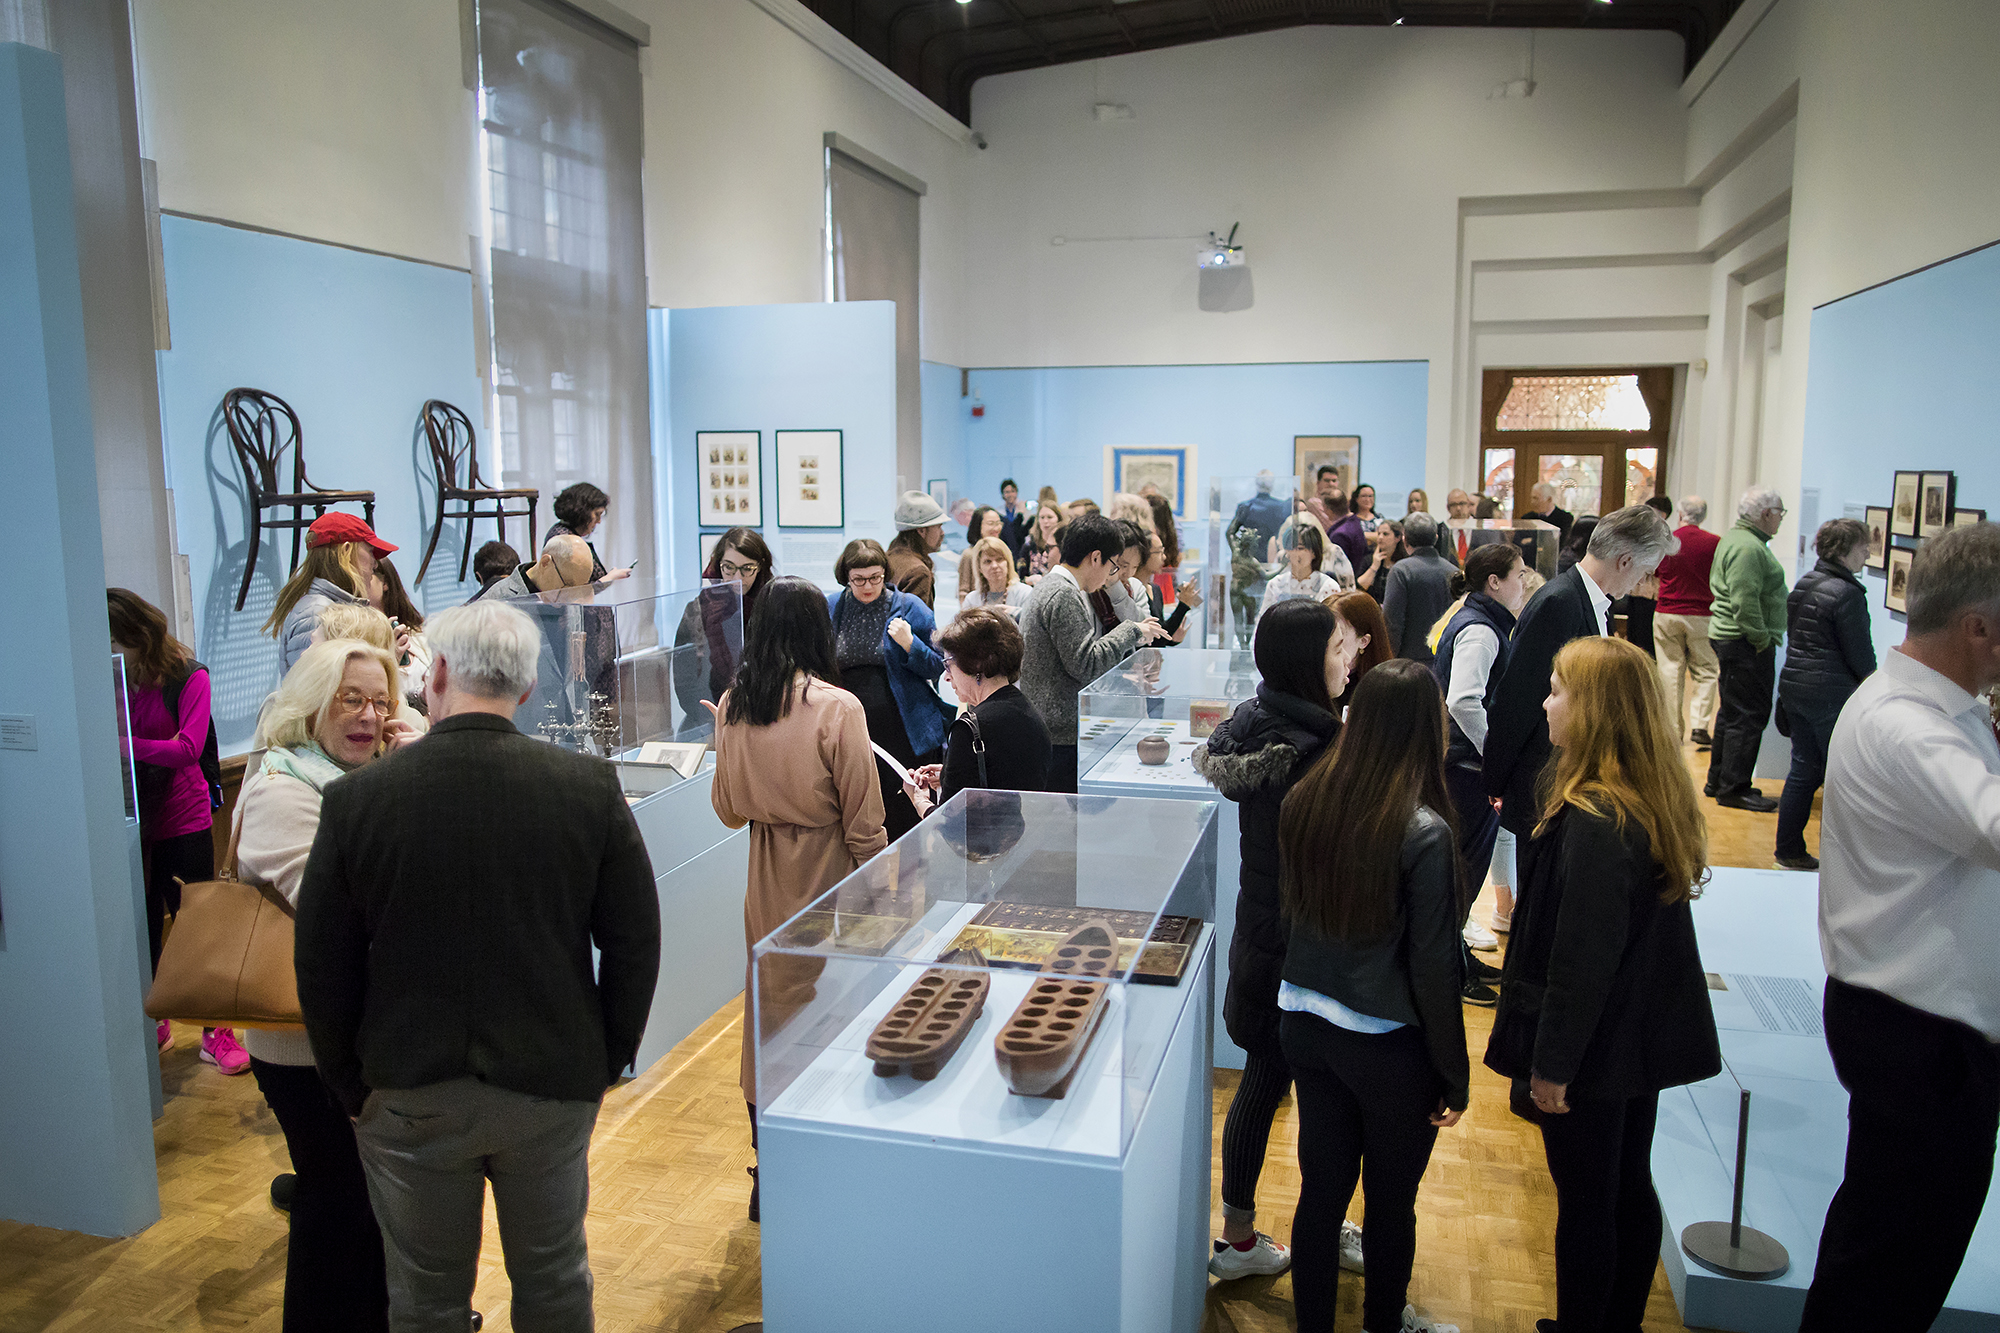 Penn Professor Andre Dombrowski teaches an art history curatorial seminar on World's Fairs, resulting in an Arthur Ross Gallery exhibition.